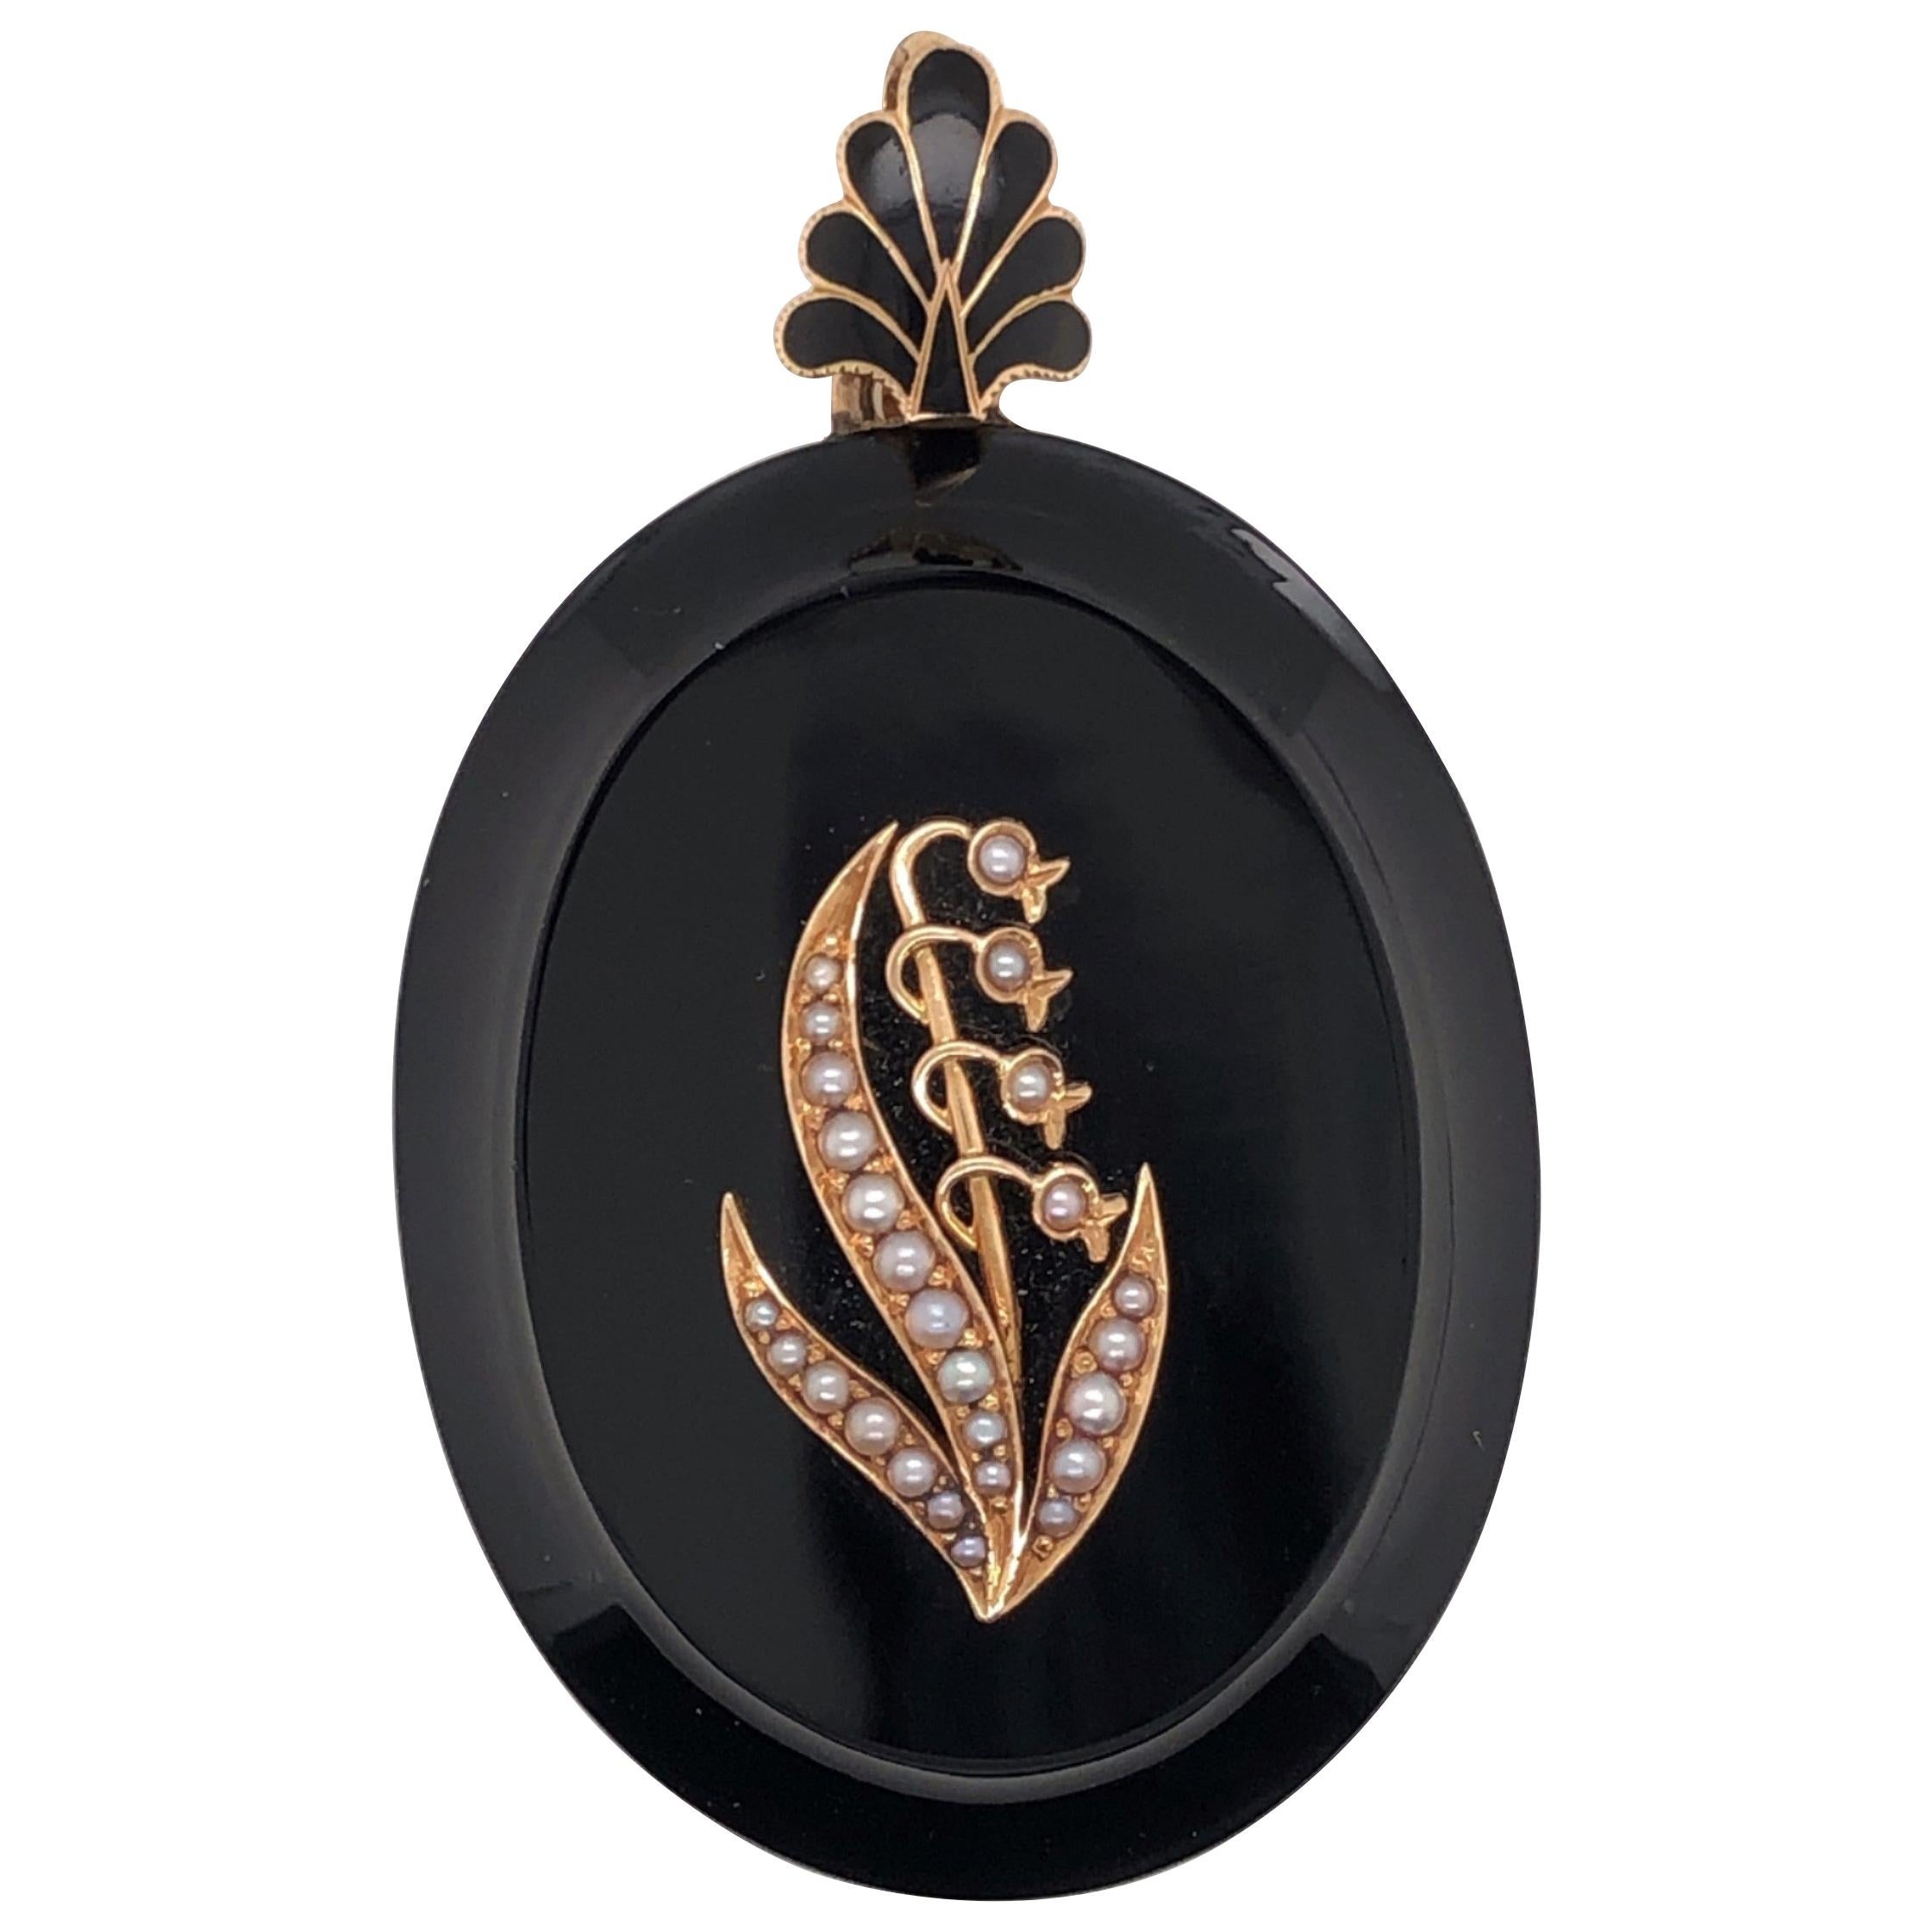 This is a gorgeous Victorian locket, circa 1880-1890, in fabulous condition! The body of the locket is made of black onyx and the bail is made of 14kt yellow gold with black enamel. The front face of the locket displays a Lily of the Valley made of